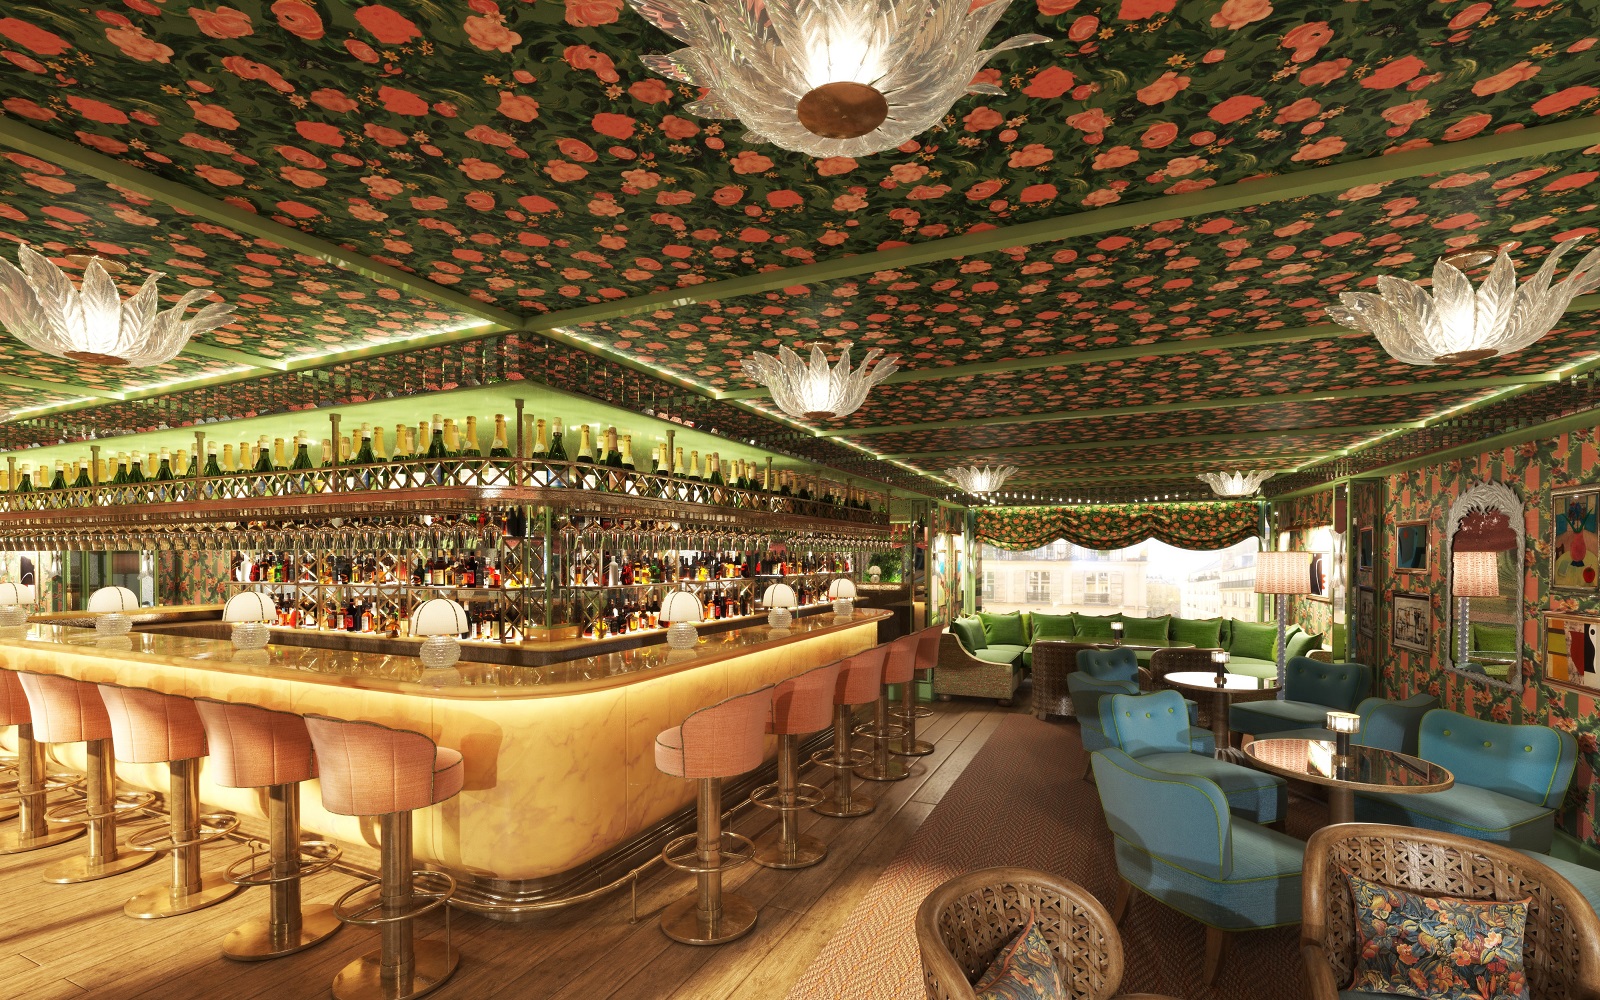 Bar in the hotel La Fantaisie with wallpapered floral ceiling and vintage lights around a central backlit bar